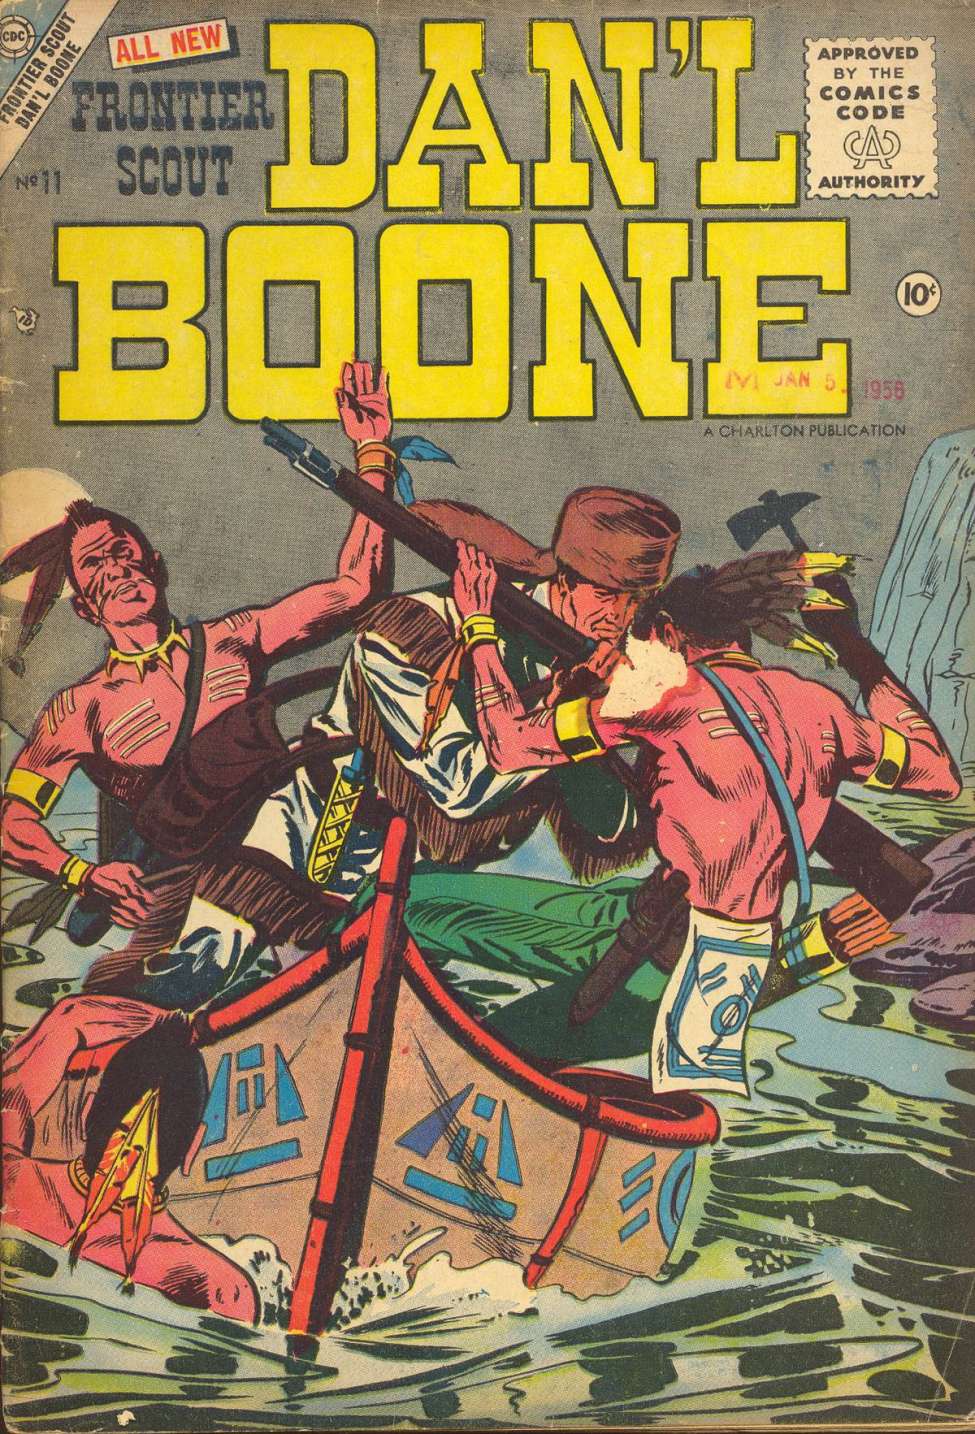 Book Cover For Frontier Scout, Dan'l Boone 11